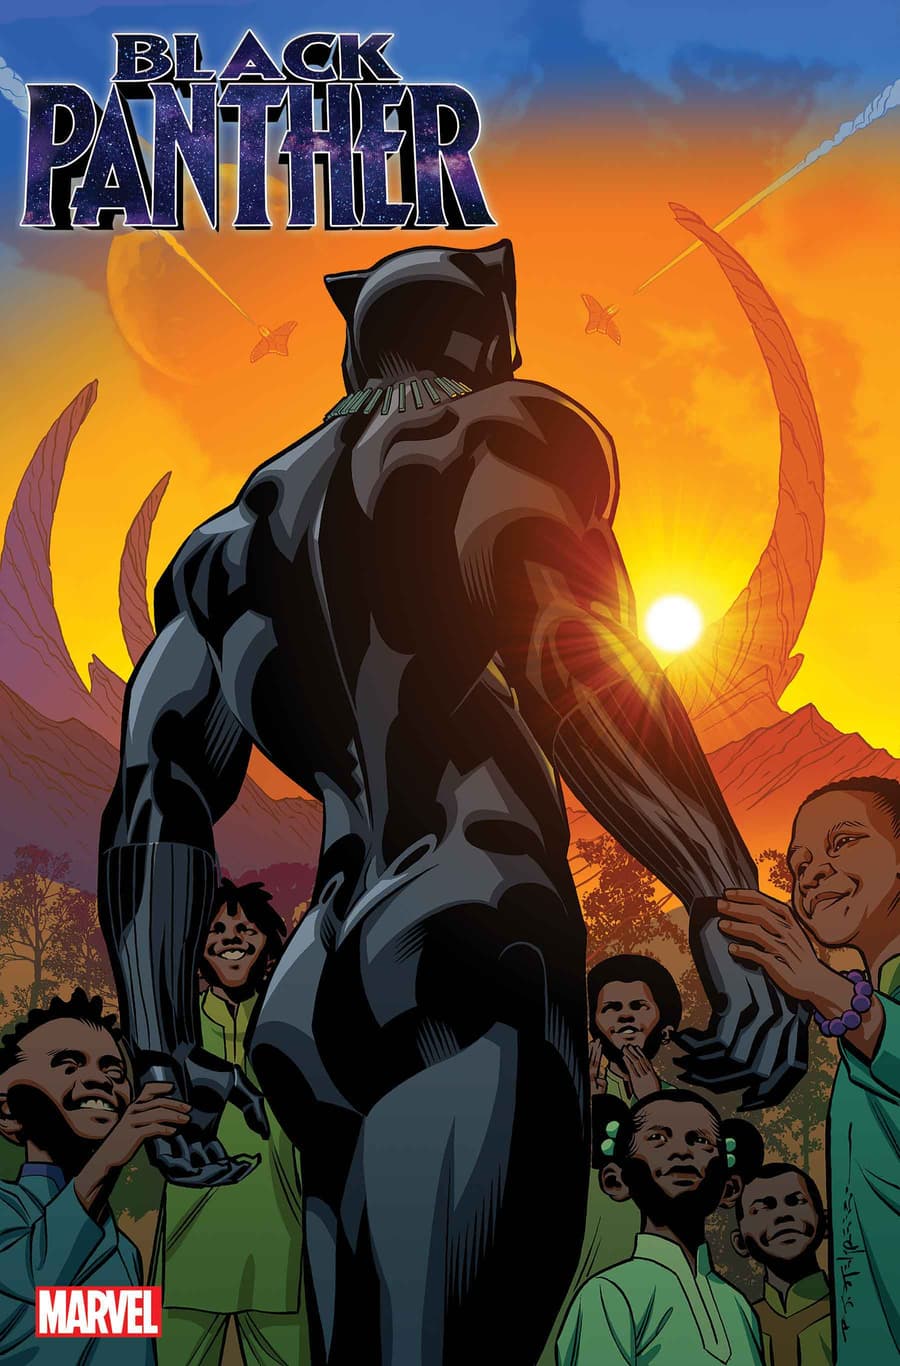 Black Panther variant by Brian Stelfreeze